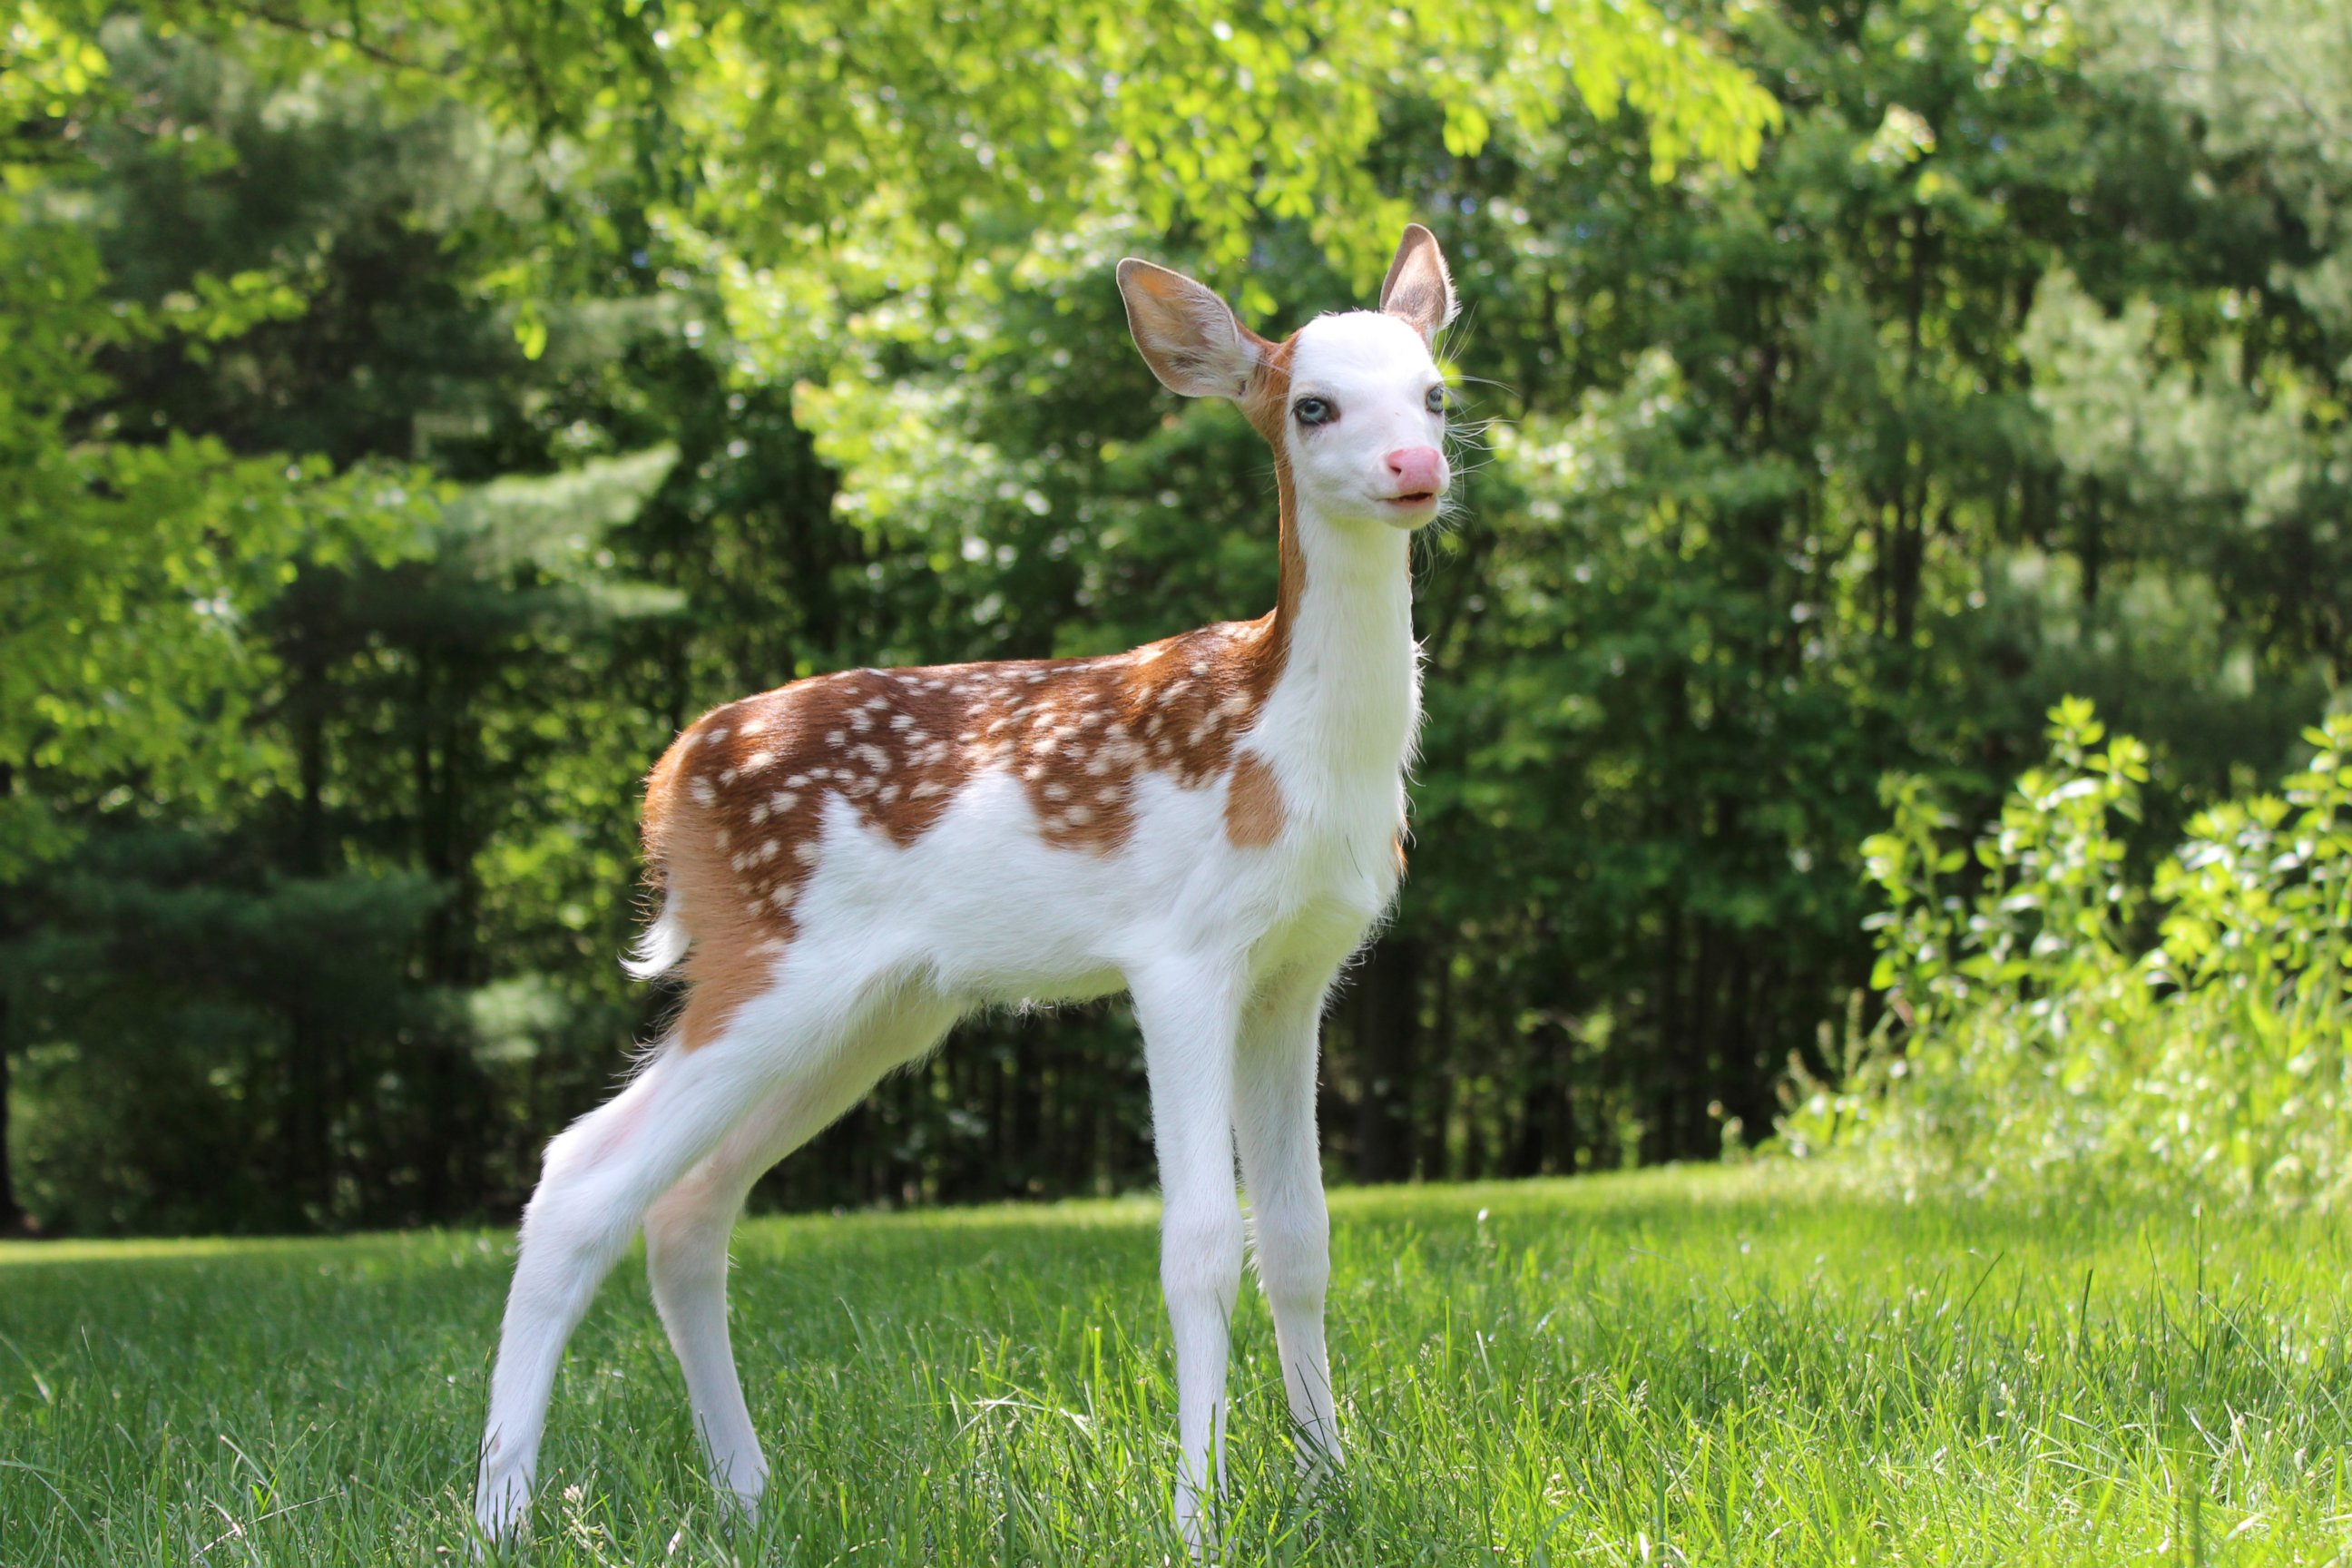 A rare white-faced fawn named Dragon, who was abandoned by his mother, has found a home at Deer Tracks Junction, an animal farm in Cedar Springs, Mich. 